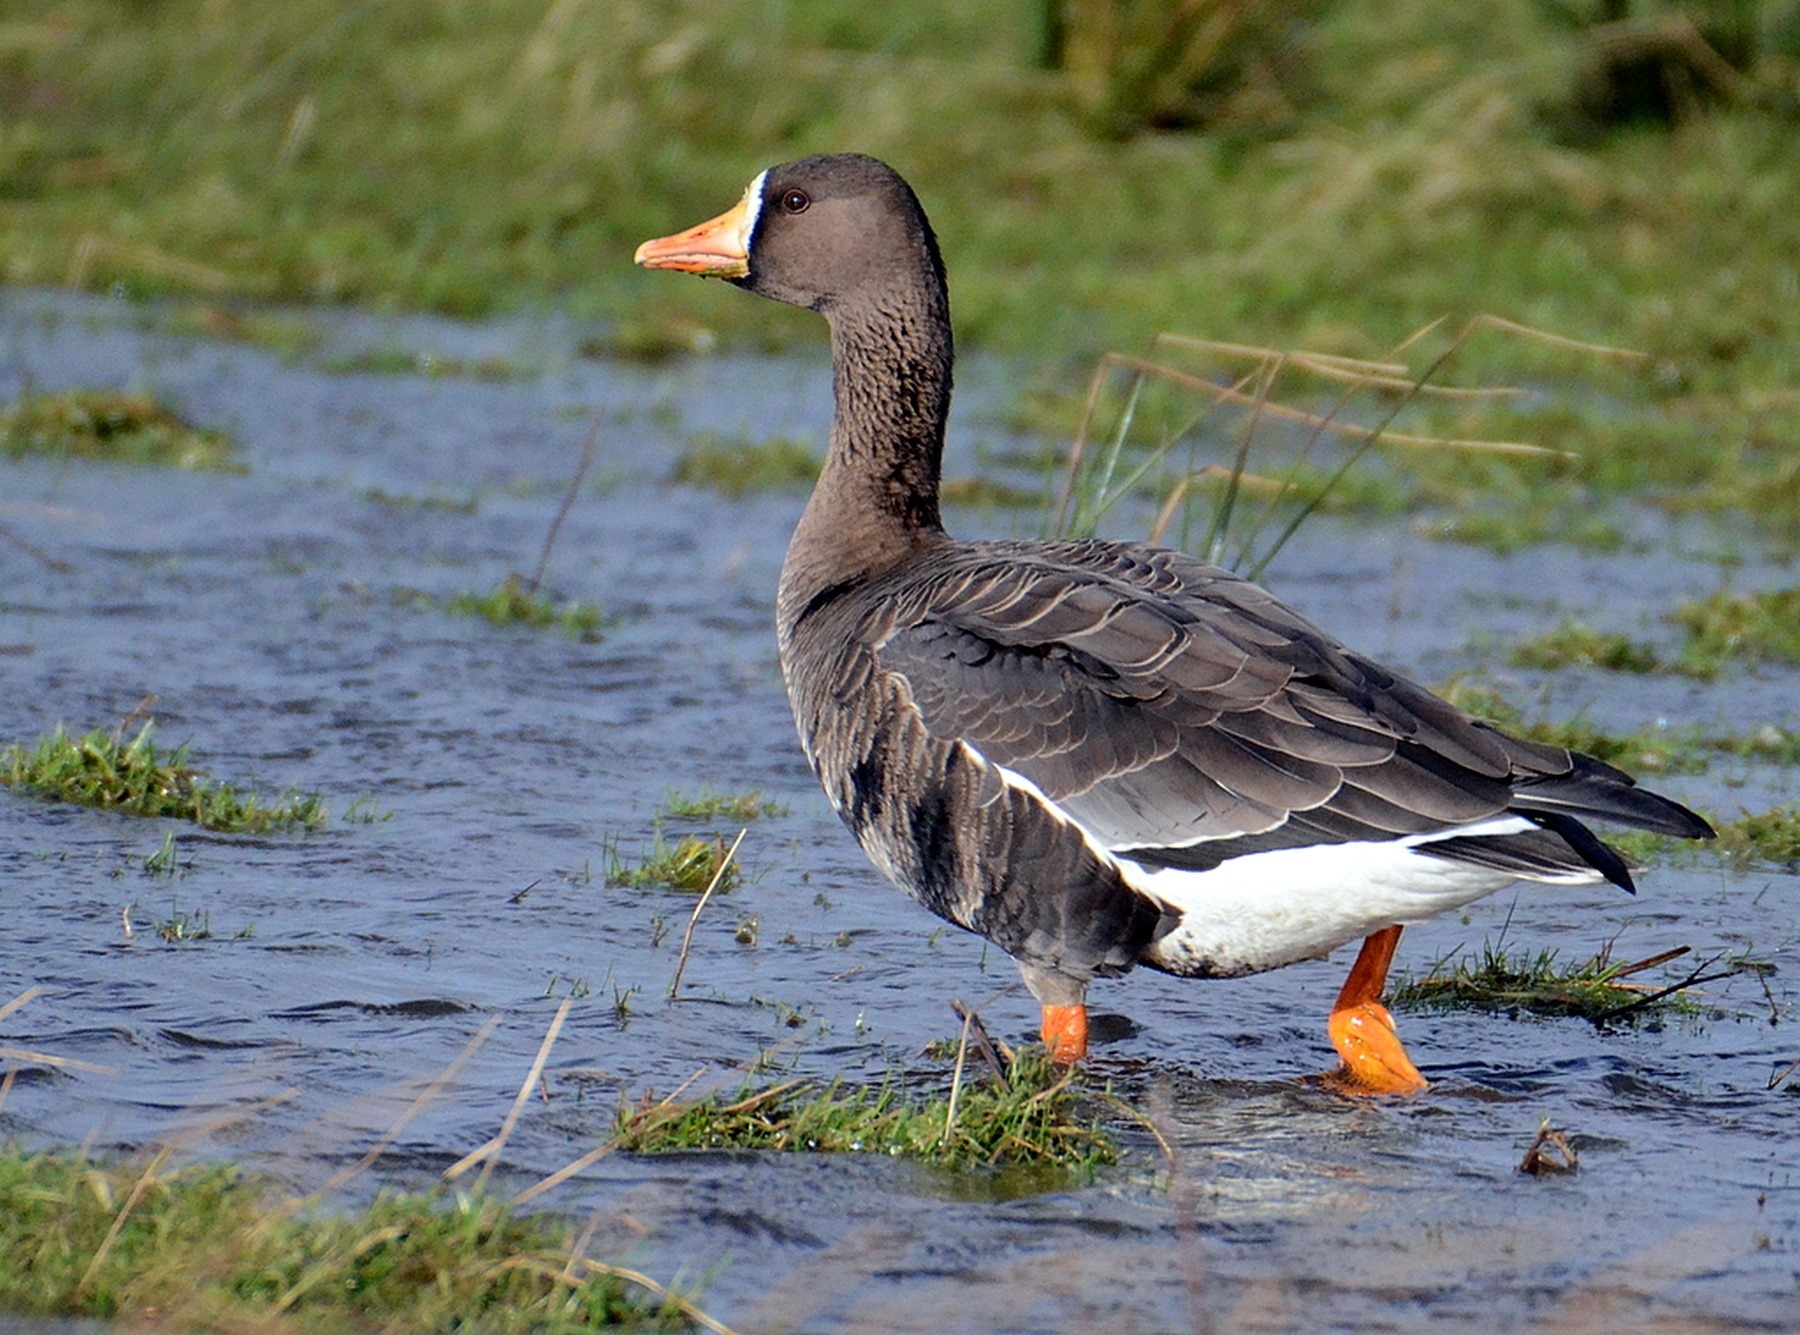 Greenland White Fronted Goose